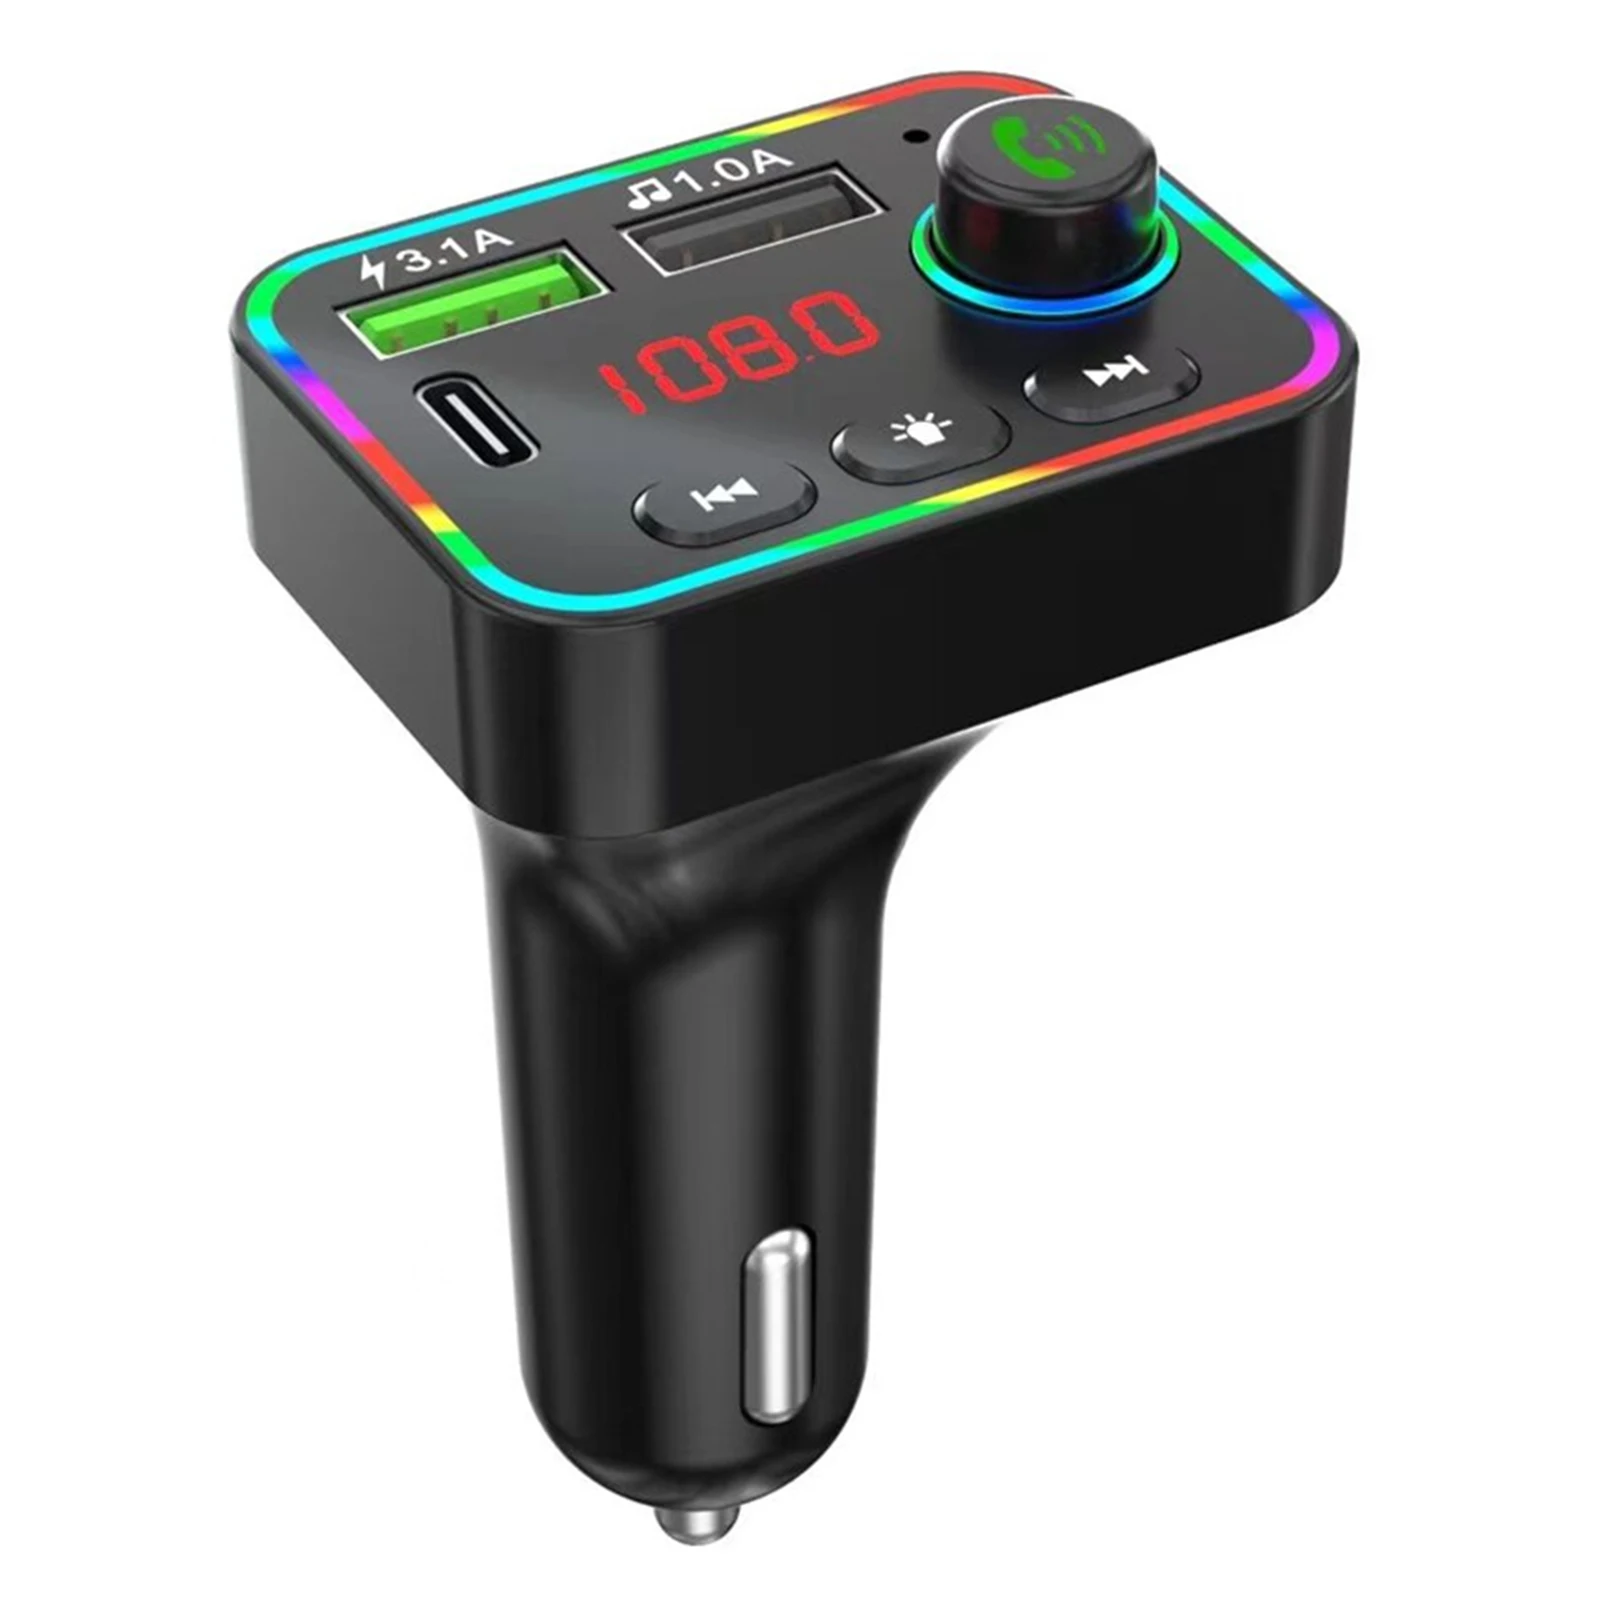 Quick 3.1 Car Charger Adapter Fast Charging Bluetooth Cigarette Lighter LED Voltage Display Dual USB Port Type-C Port